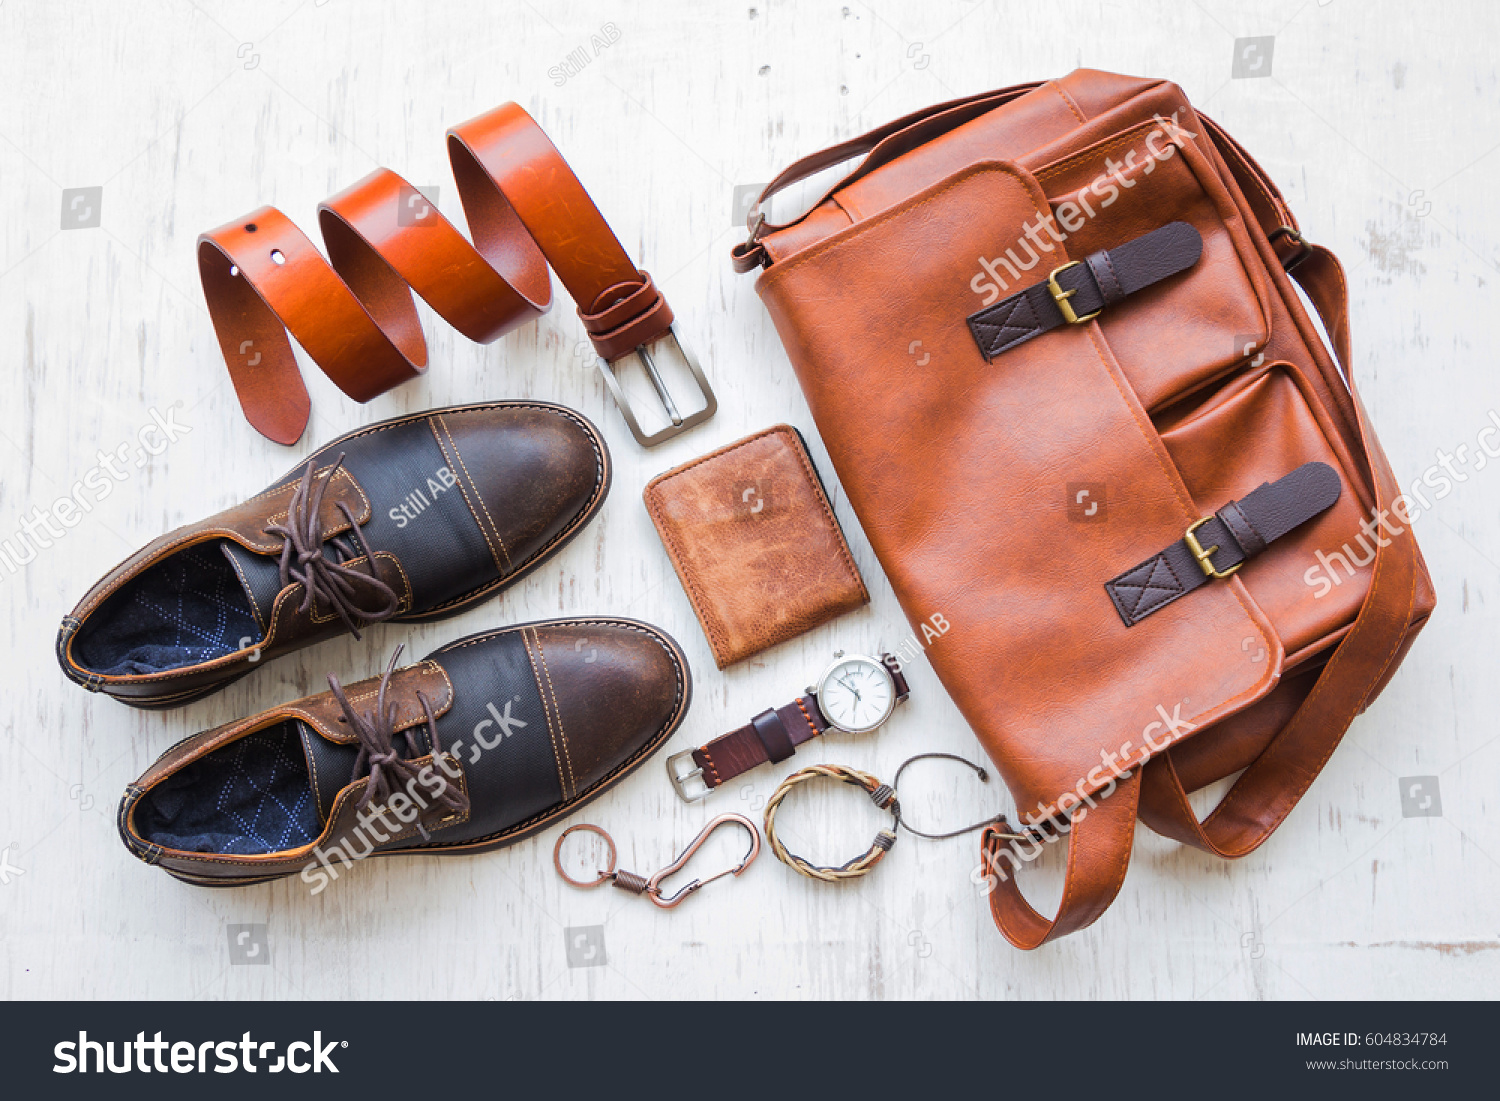 Men's casual outfits with leather accessories on white rustic wooden background, beauty and fashion concept #604834784